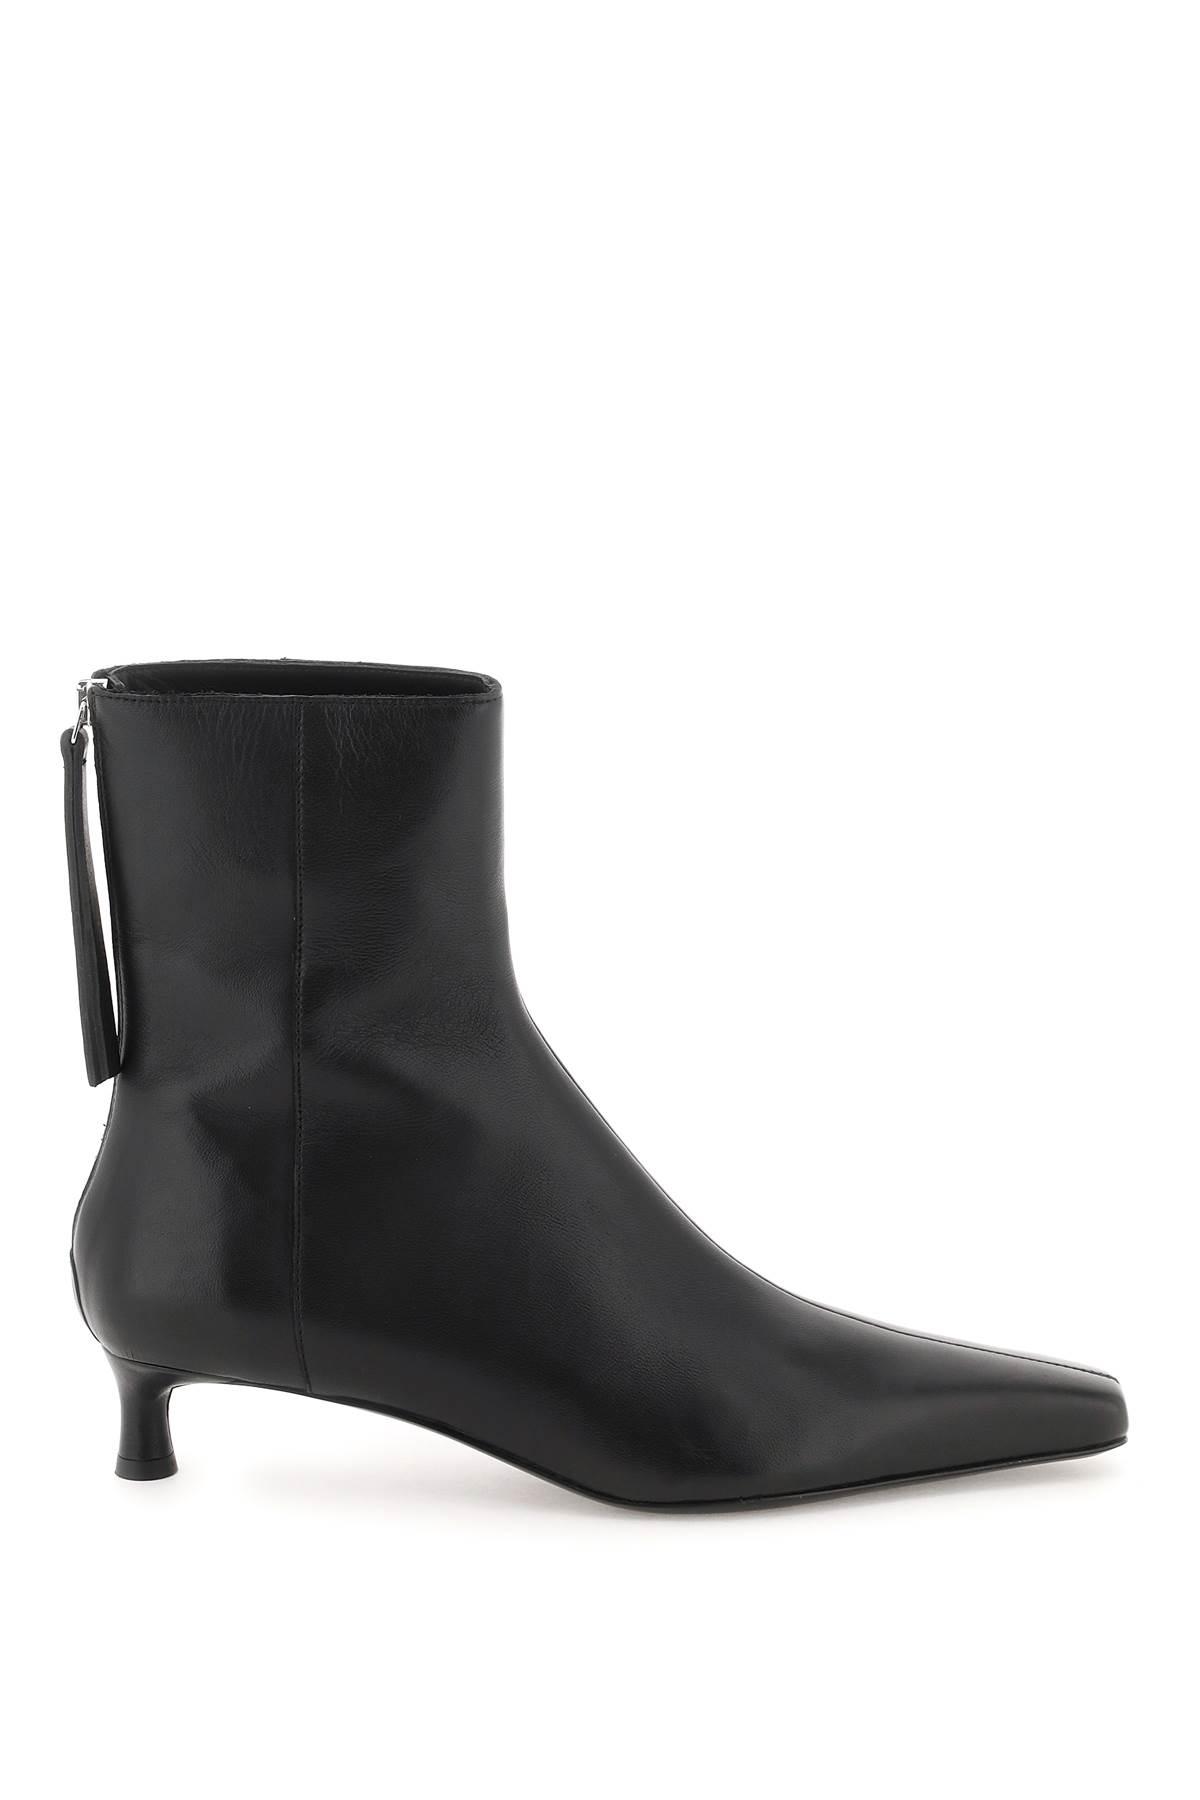 By Malene Birger Micella Ankle Boots in Black | Lyst